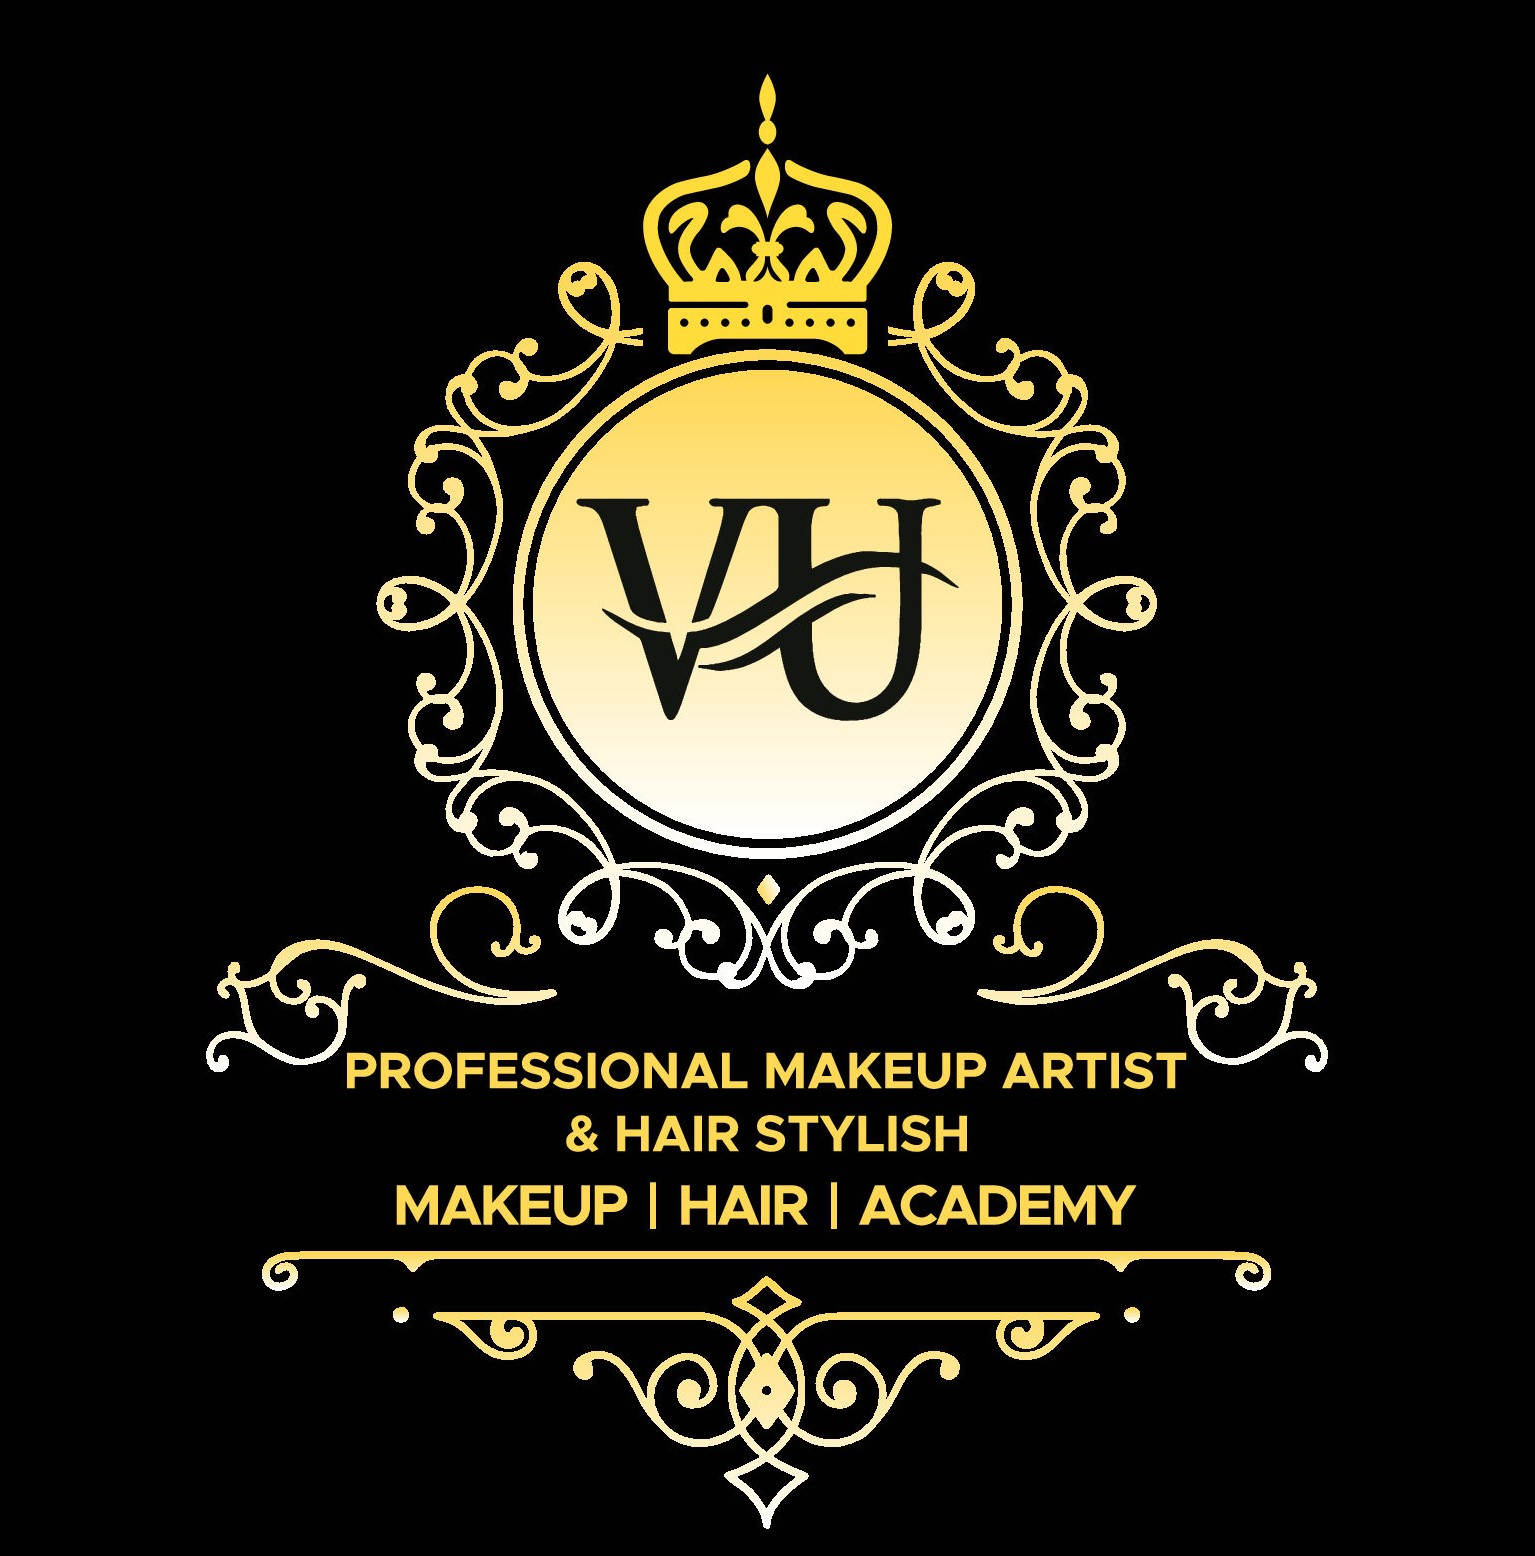 Varsha Makeup and Hair Academy|Coaching Institute|Education